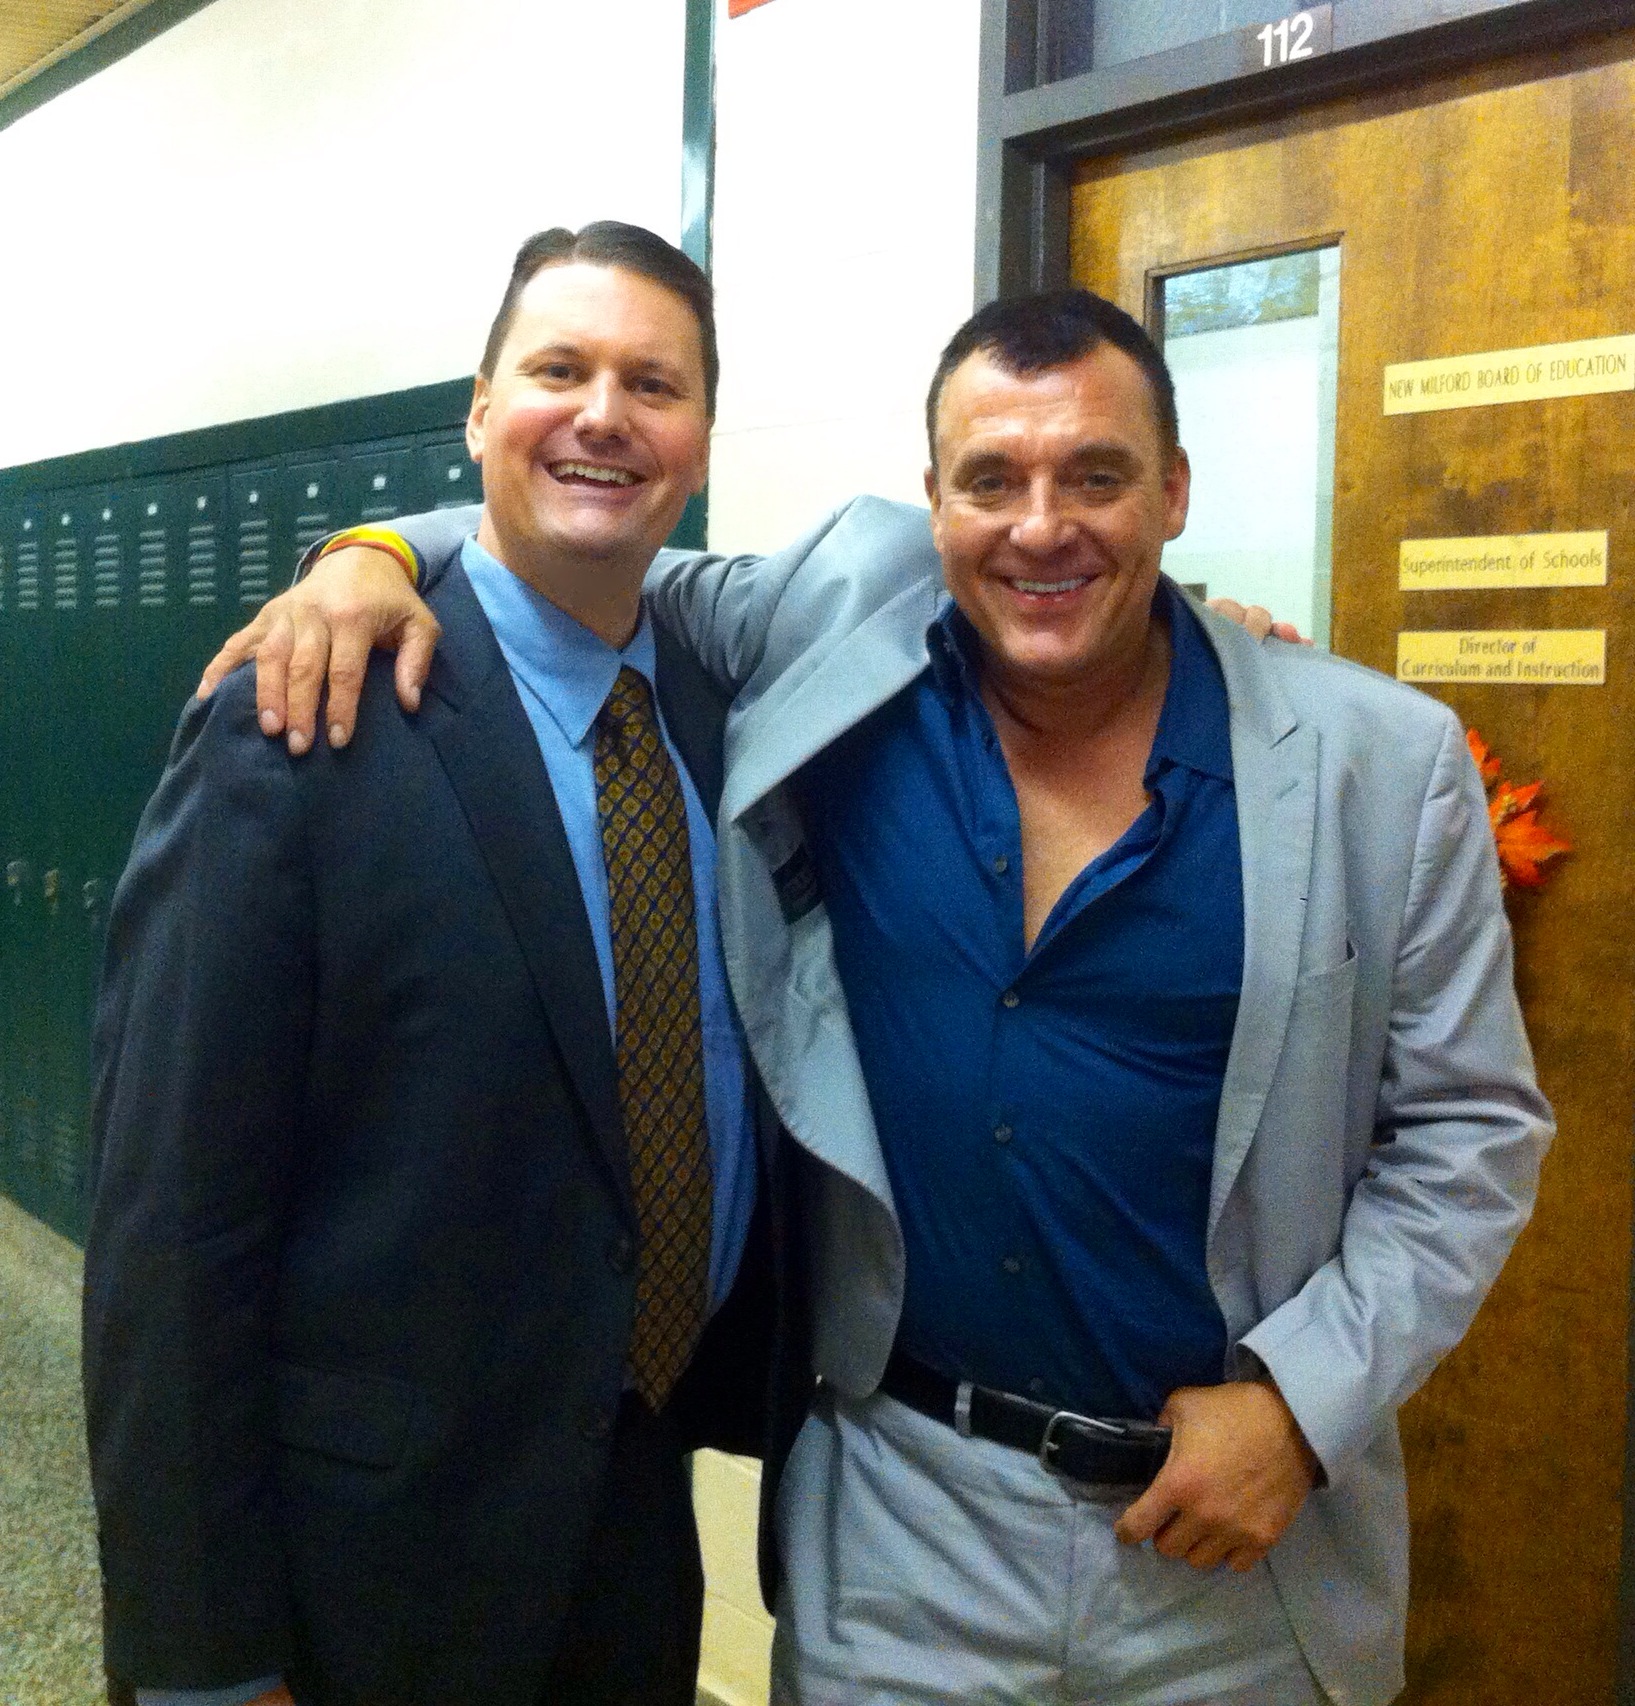 Jack Moran and Tom Sizemore on the set of Clandestine